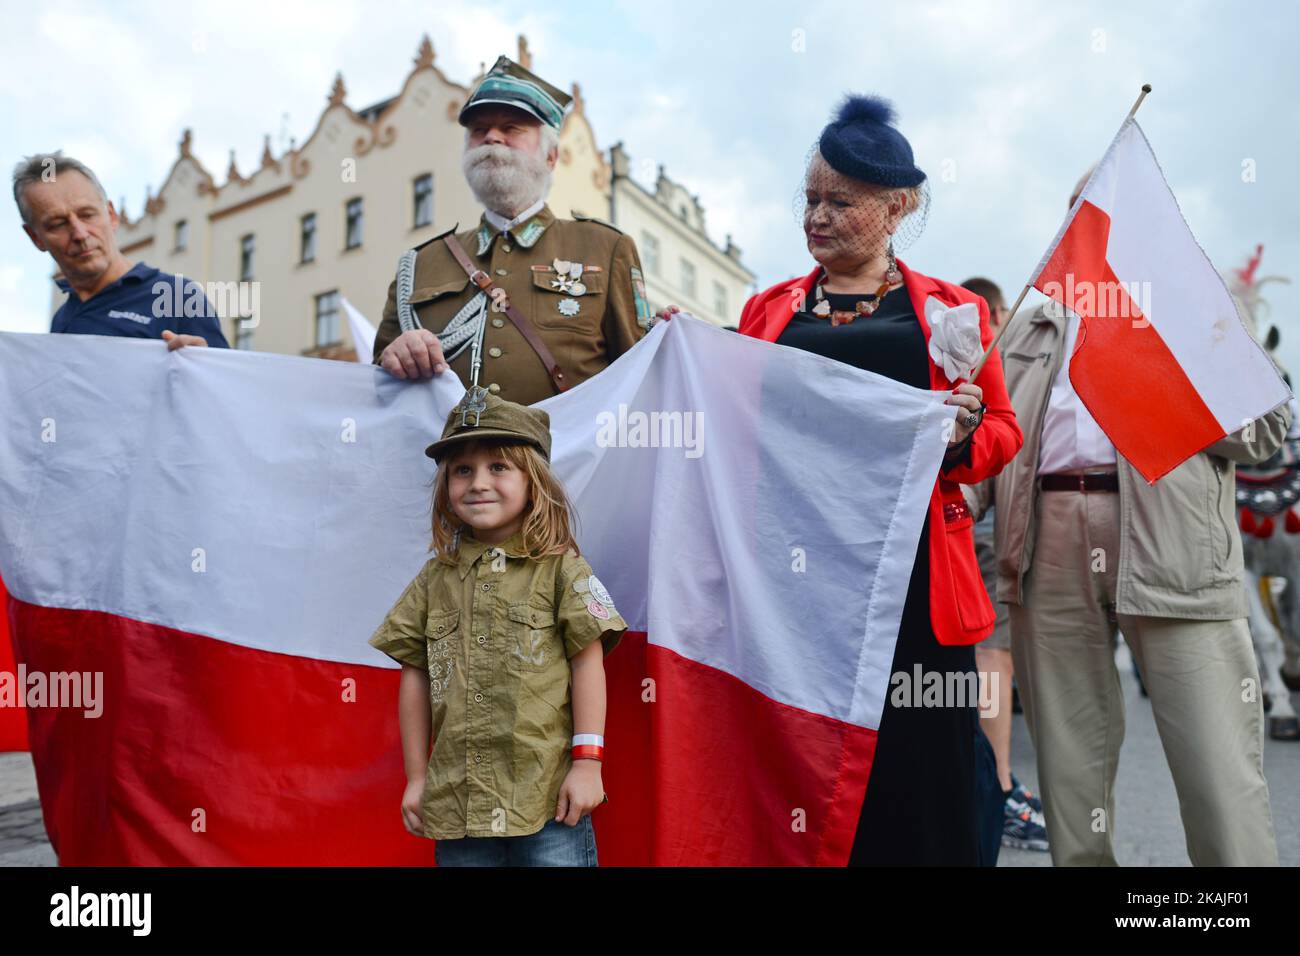 The 72nd anniversary of Warsaw Upraising 1944, in Krakow city center on 1 August, 2016, in Krakow, Poland. Photo by Artur Widak *** Please Use Credit from Credit Field *** Stock Photo